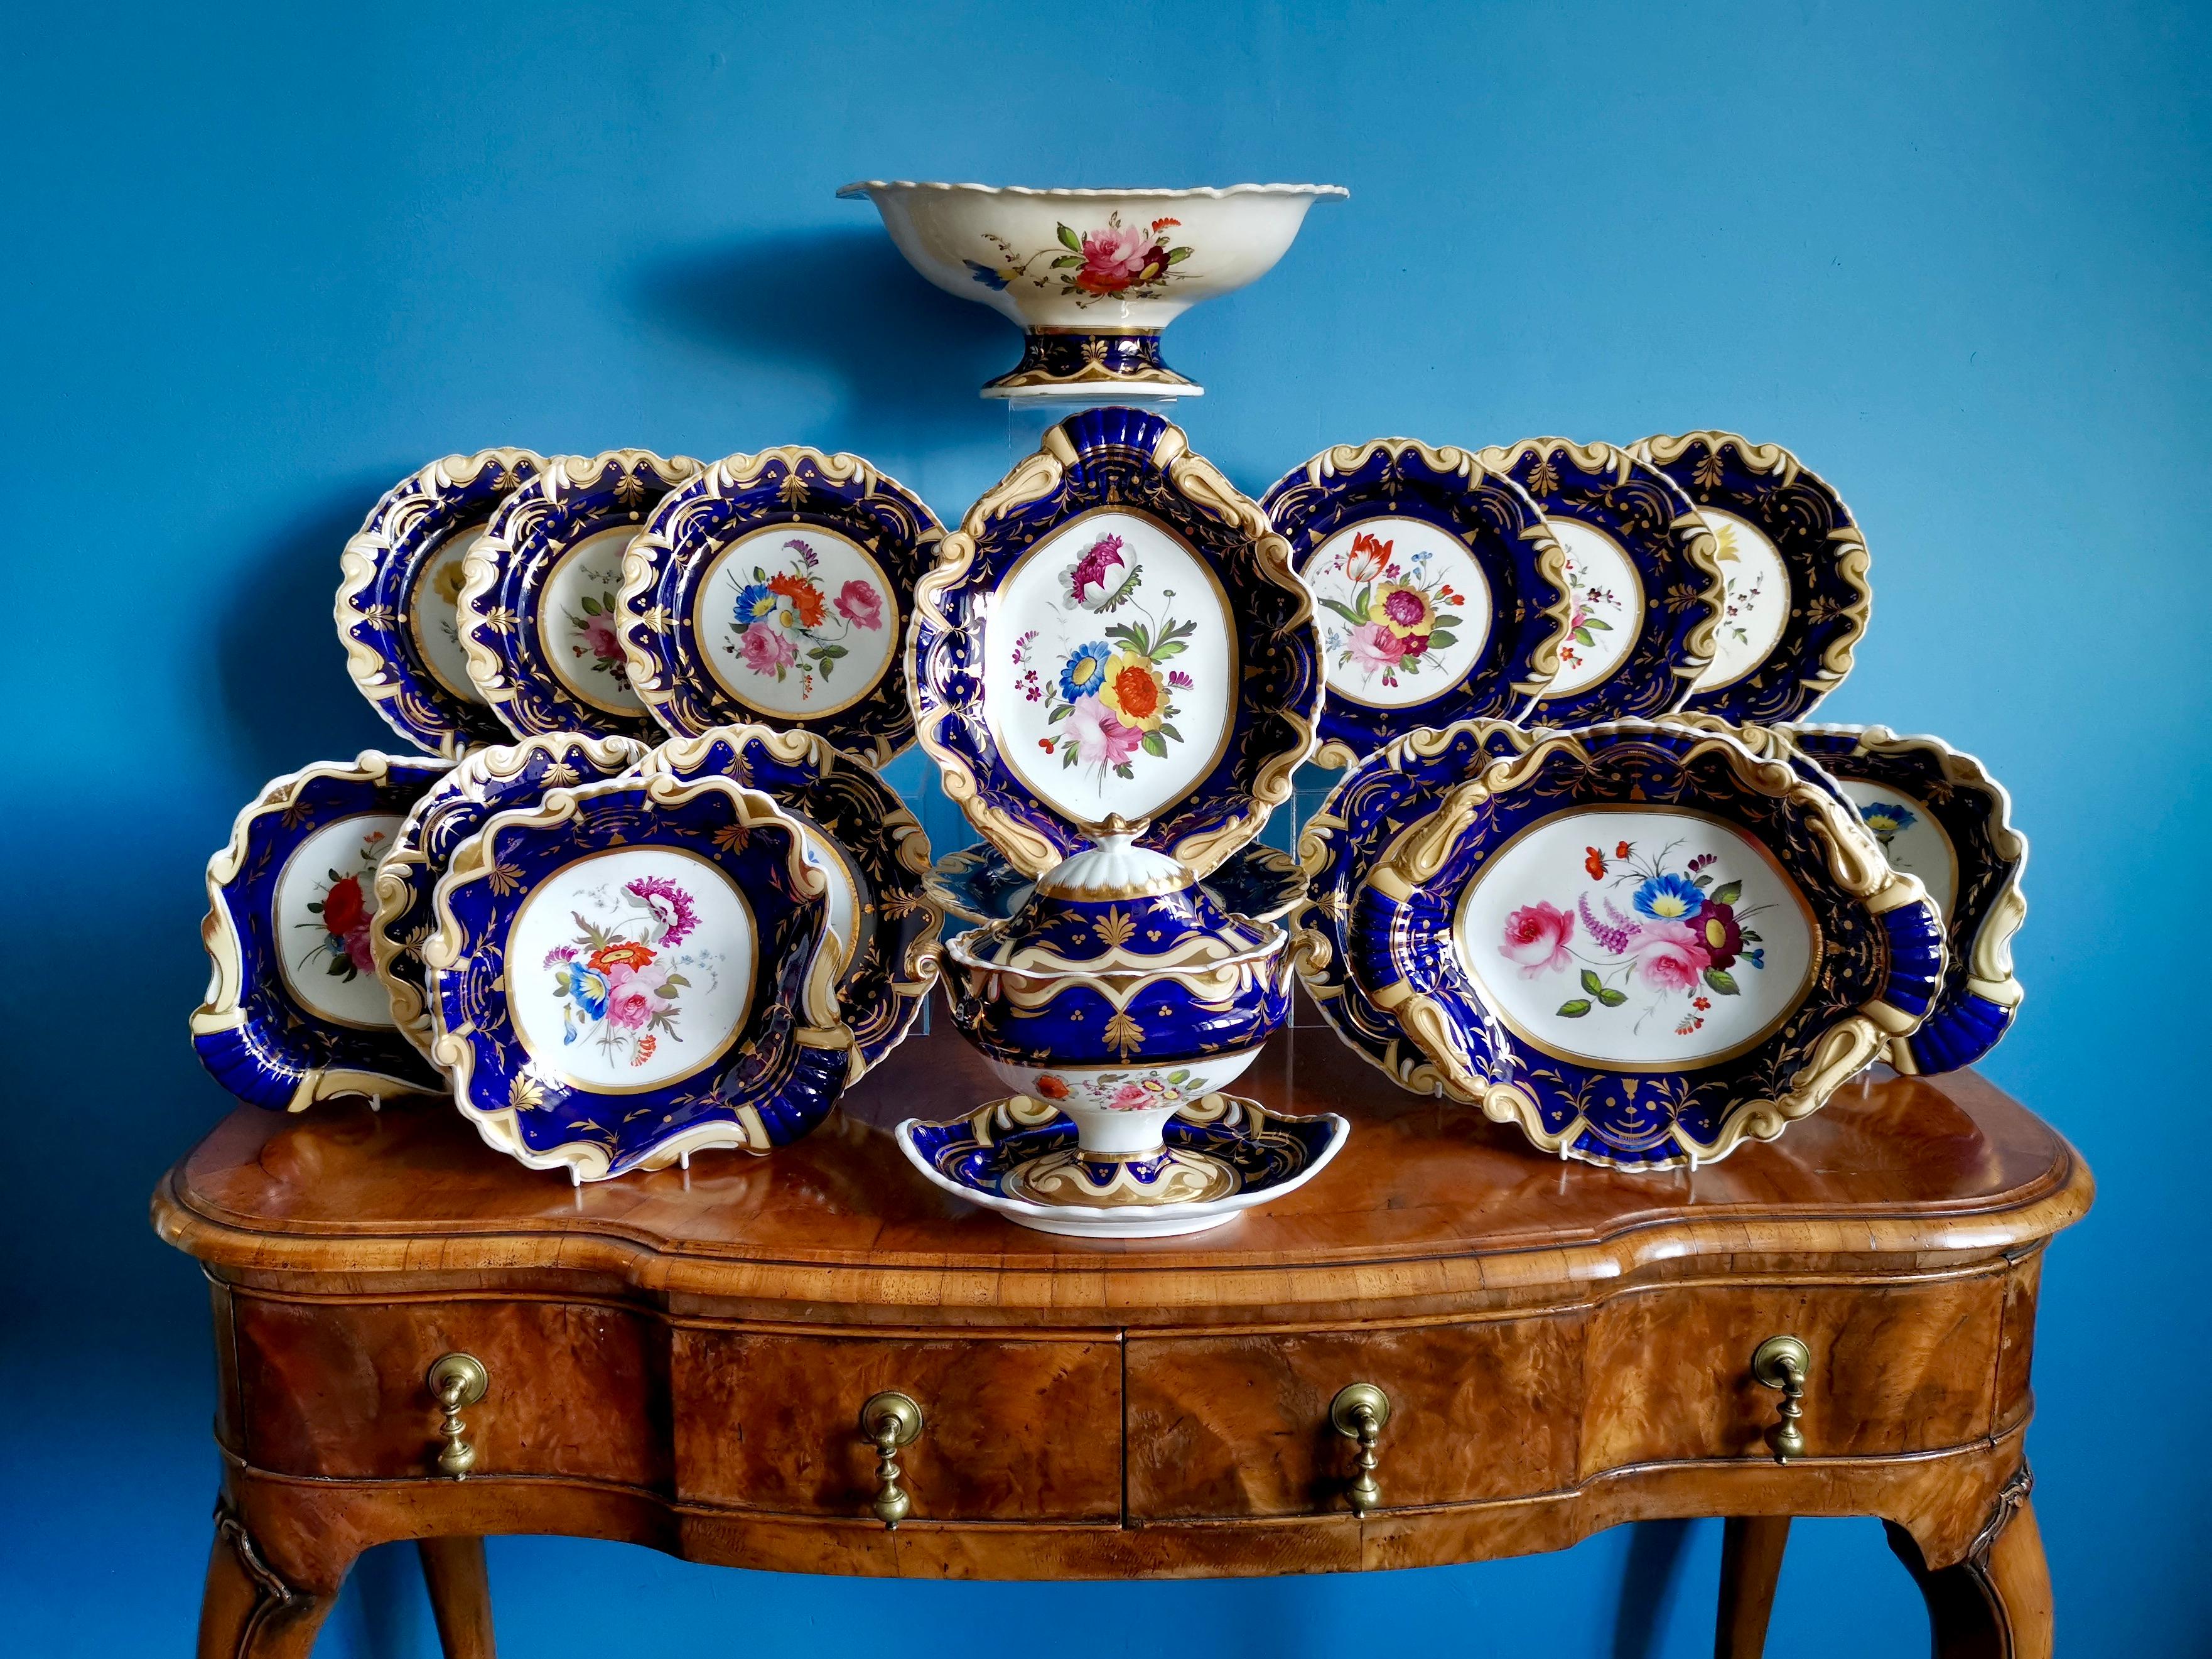 This is a stunning part dessert service from circa 1825, which is known as the Regency period. The service consists of eleven plates, three shell-shaped serving dishes, two oval serving dishes, a lidded sauce comport on an attached stand, and a